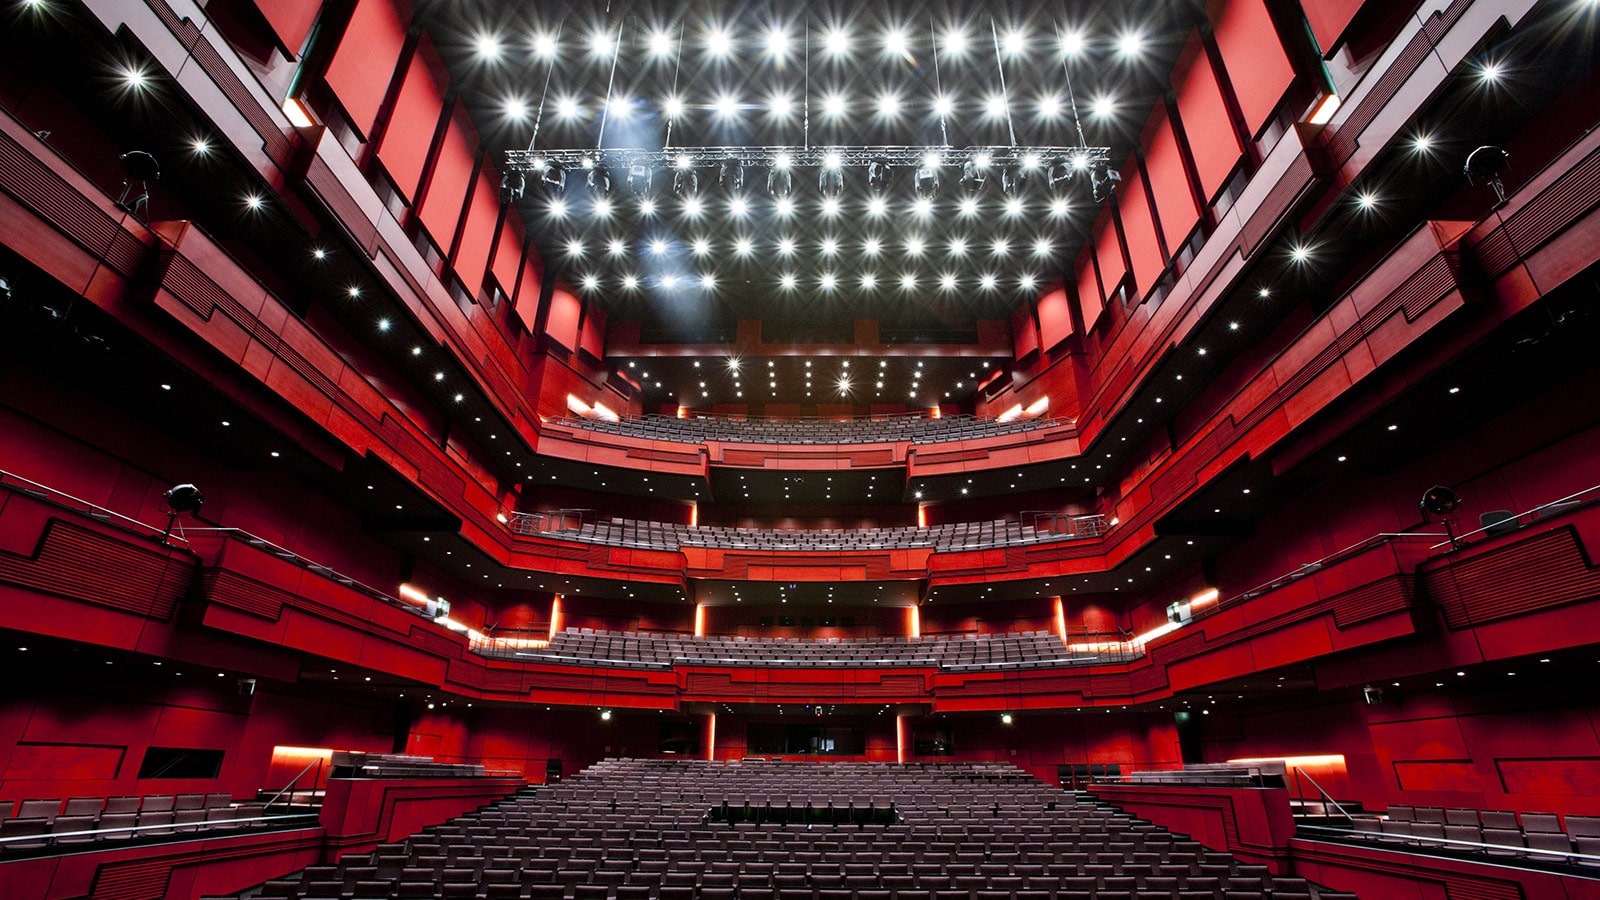 Iceland's Magnificent Harpa Concert Hall & Conference Centre is Complete with Meyer Sound